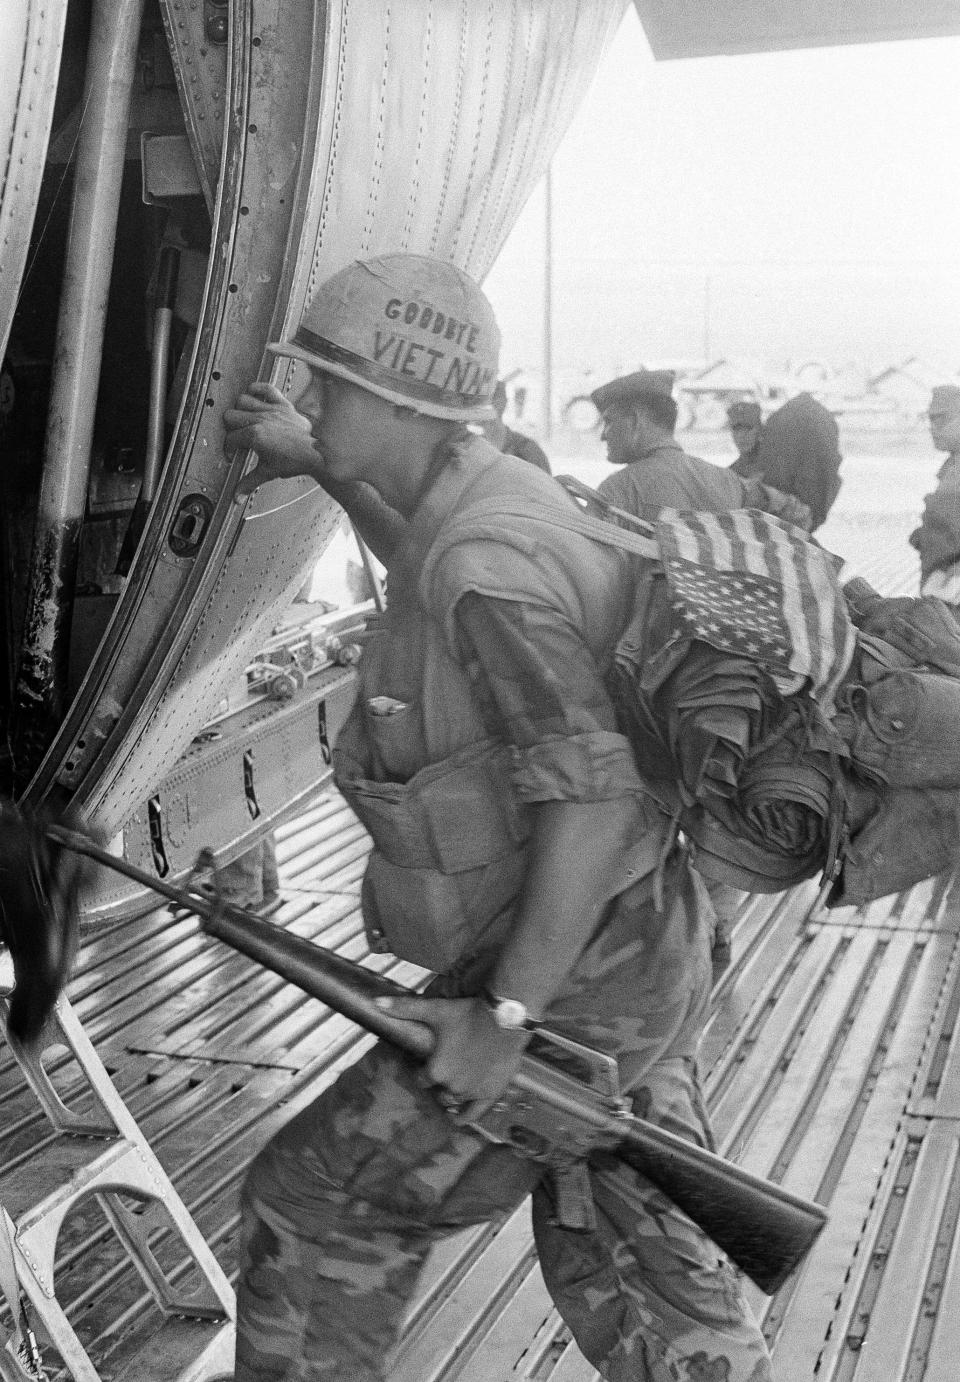 A U.S. Marine with rifle, American flag on his pack and an inscription &quot;Goodbye Vietnam&quot; on his helmet, boards an Okinawa-bound transport plane at Quang Tri, South Vietnam, July 10, 1969.  He was one of 120 men of the 9th Marine Regiment which left Vietnam, and the first Marine contingent to be withdrawn from the war-torn country.